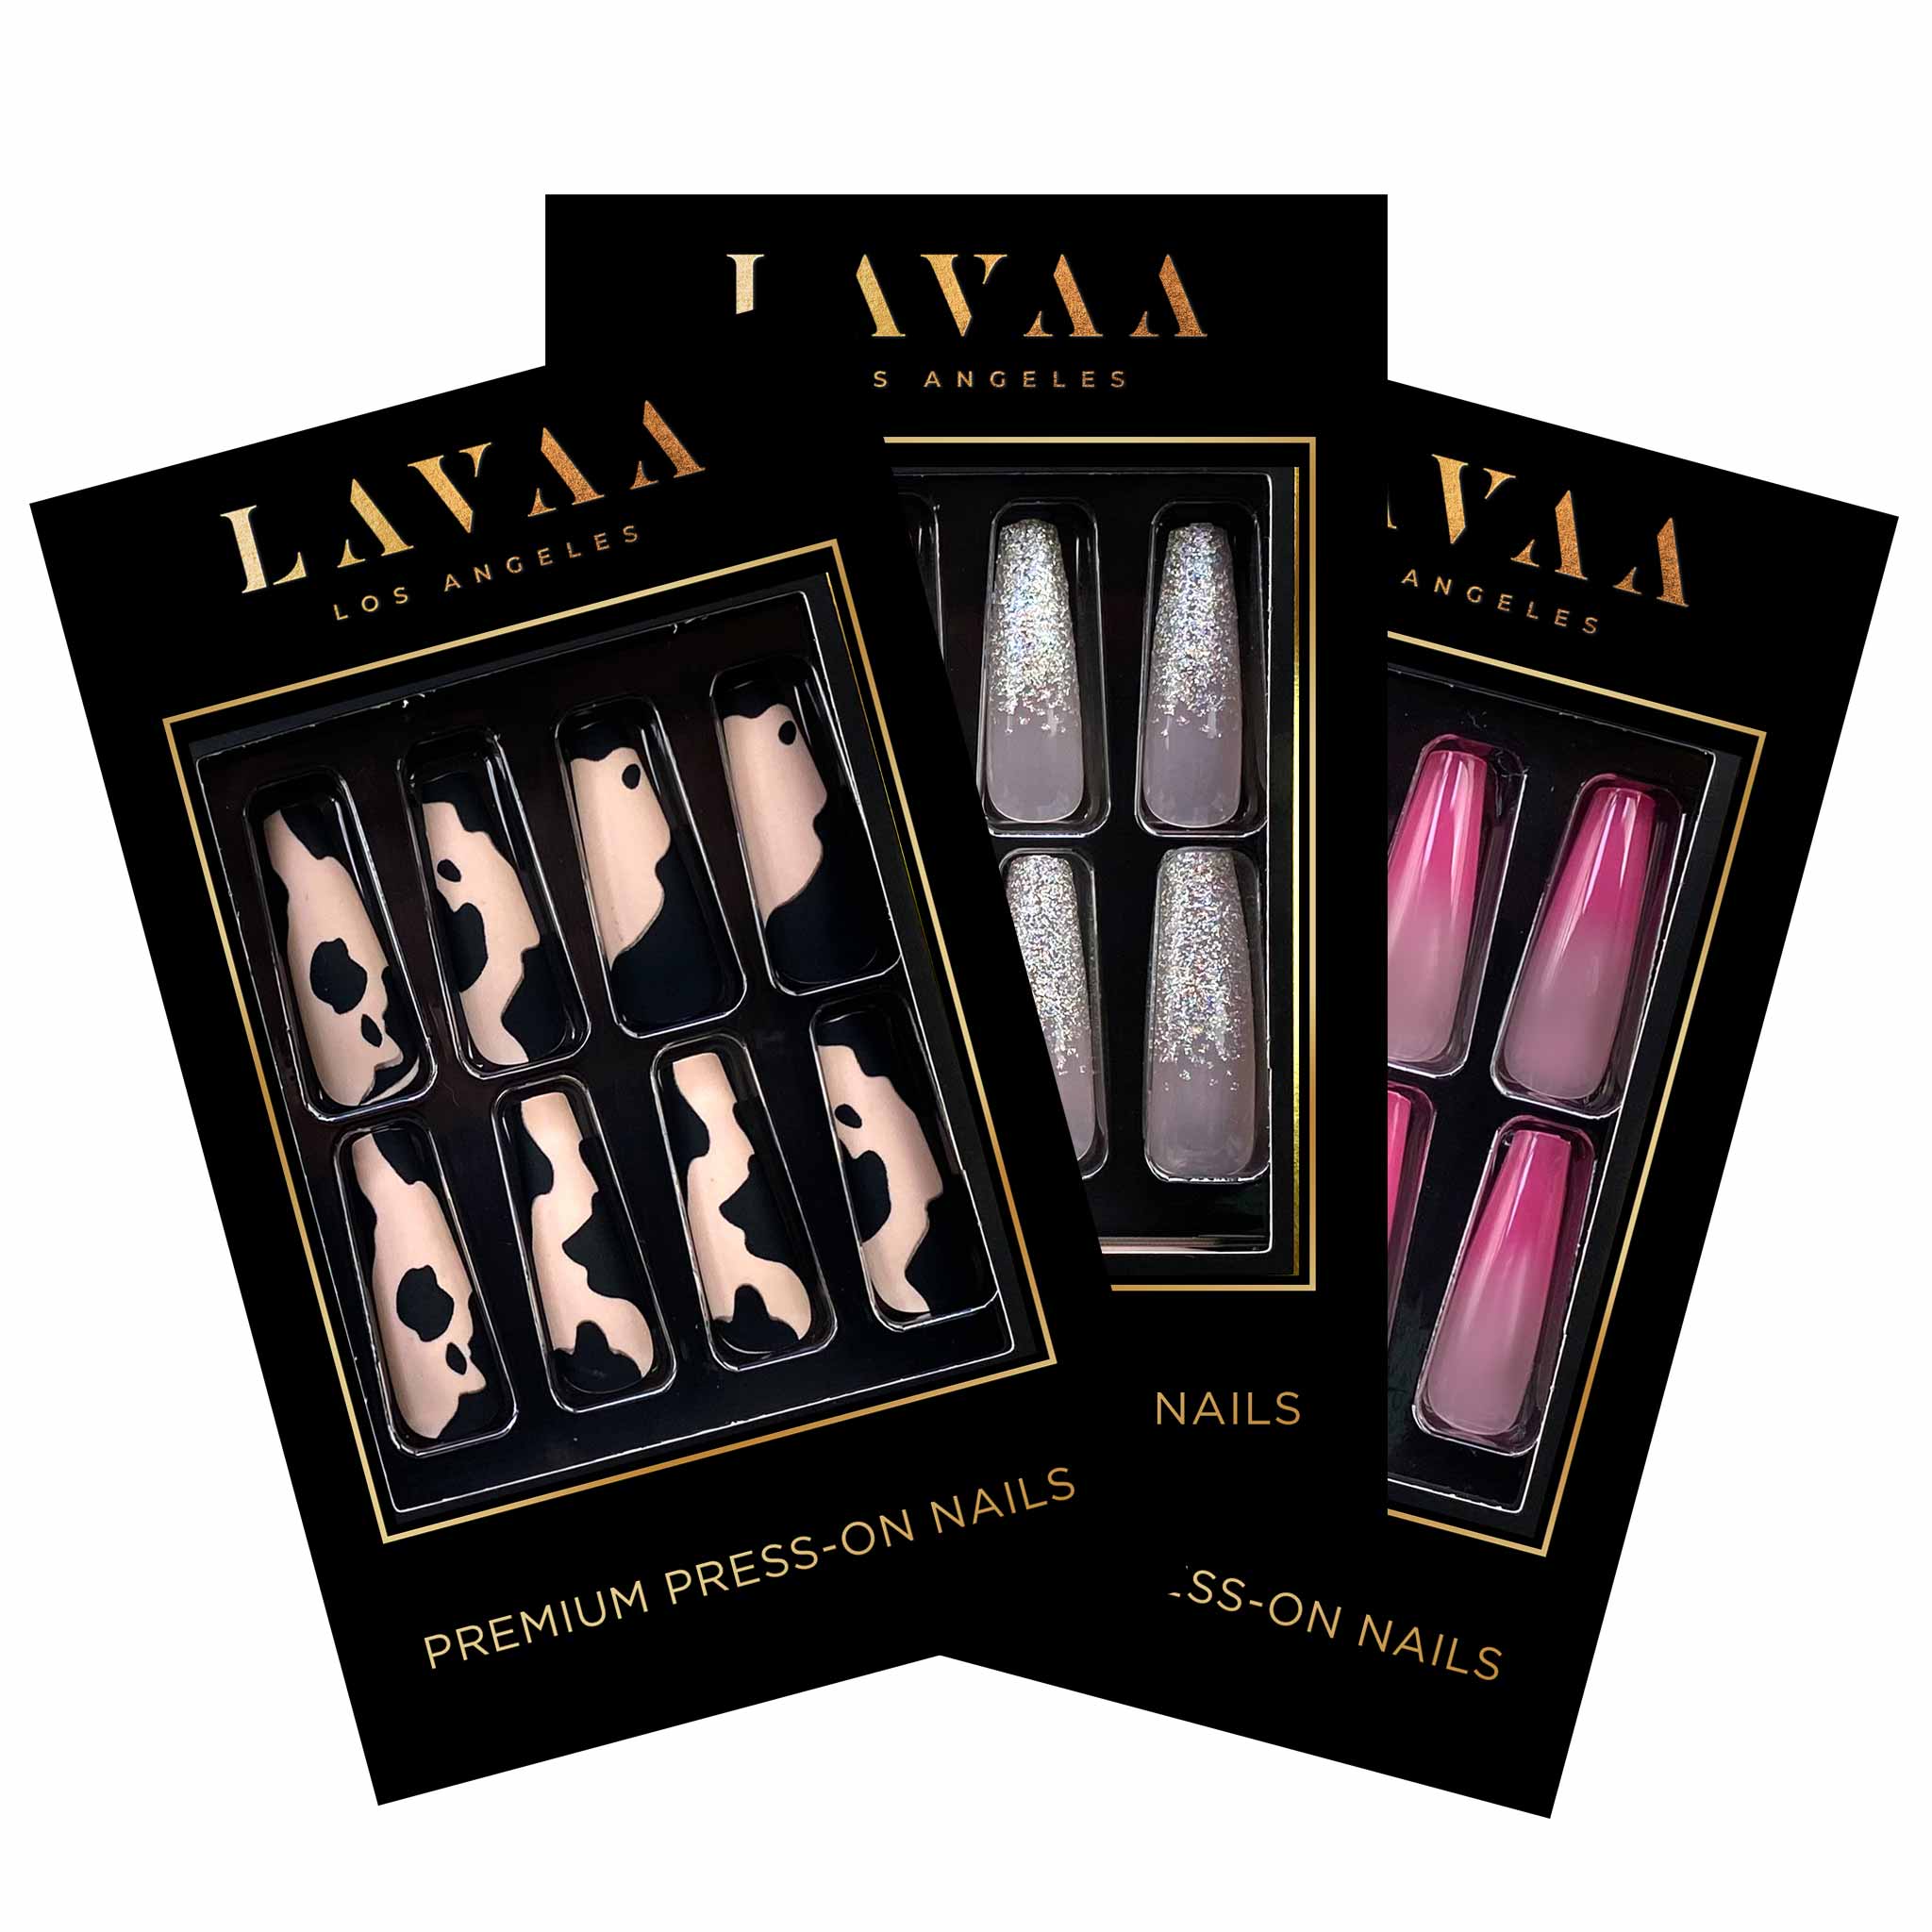 Extra Baddie: Extra Long Coffin Press-On Nail Bundle | Lavaa Beauty